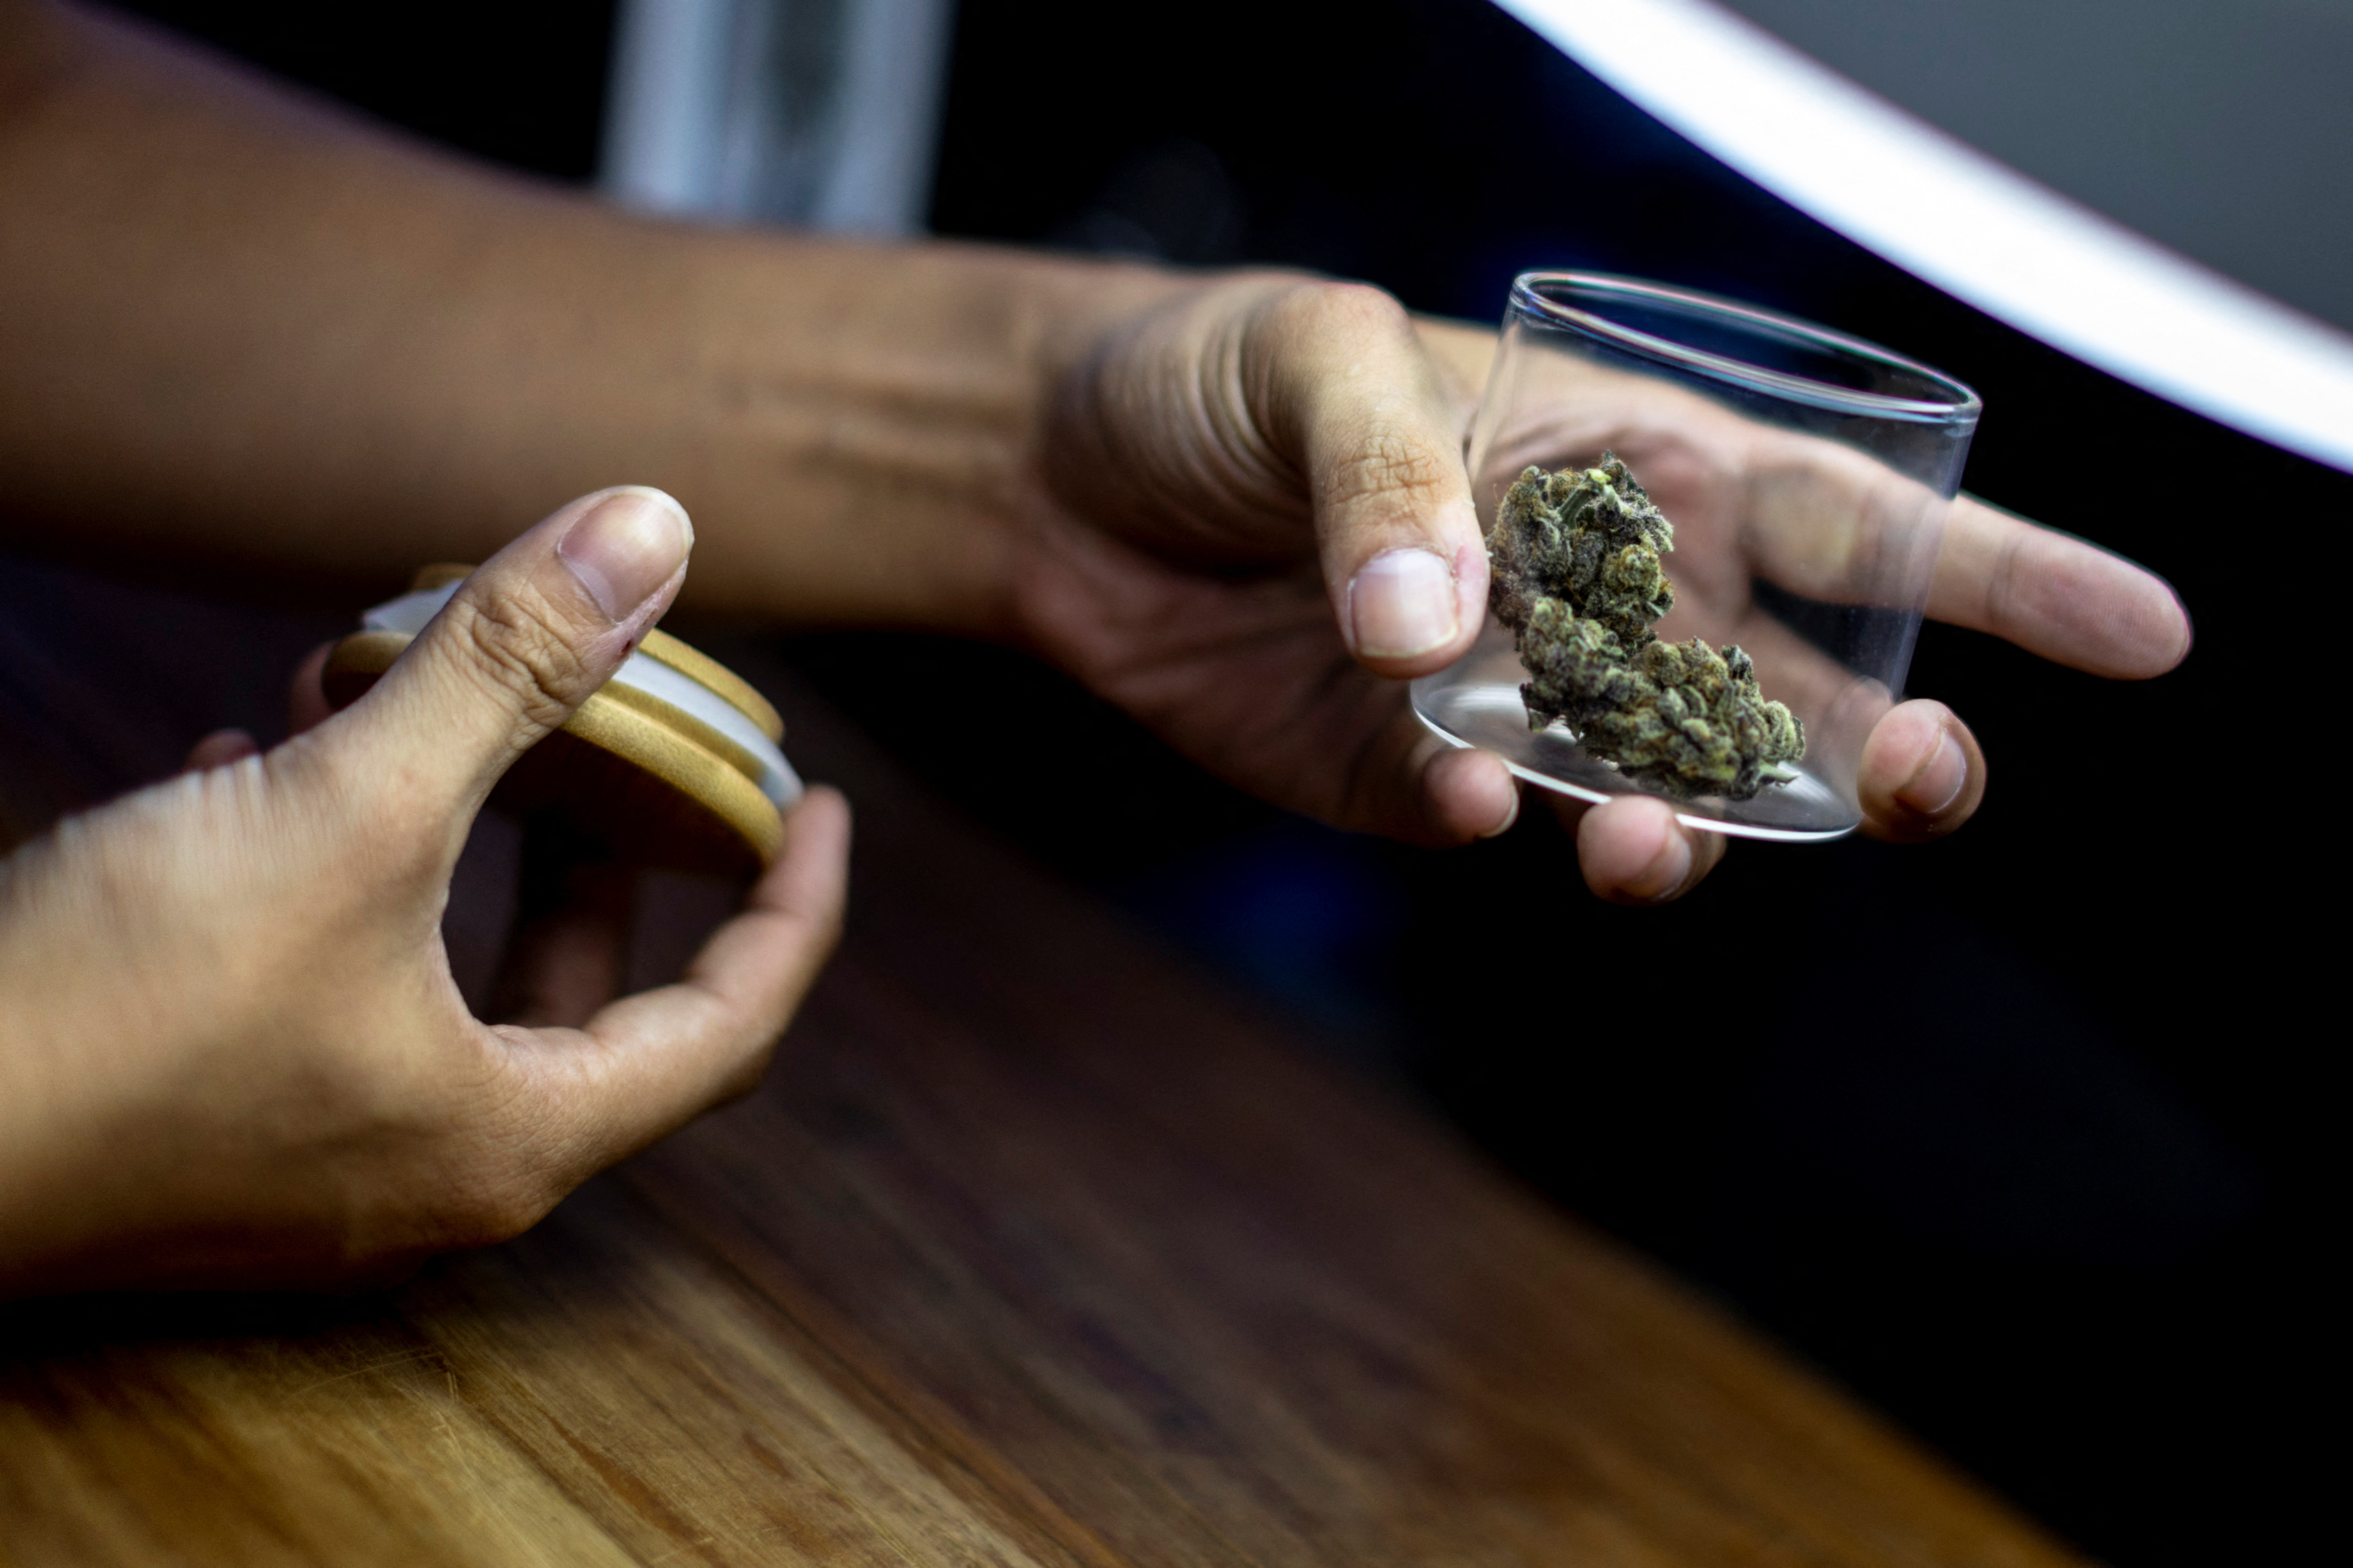 New Thai regulations to control use of cannabis come into effect a week after legalisation